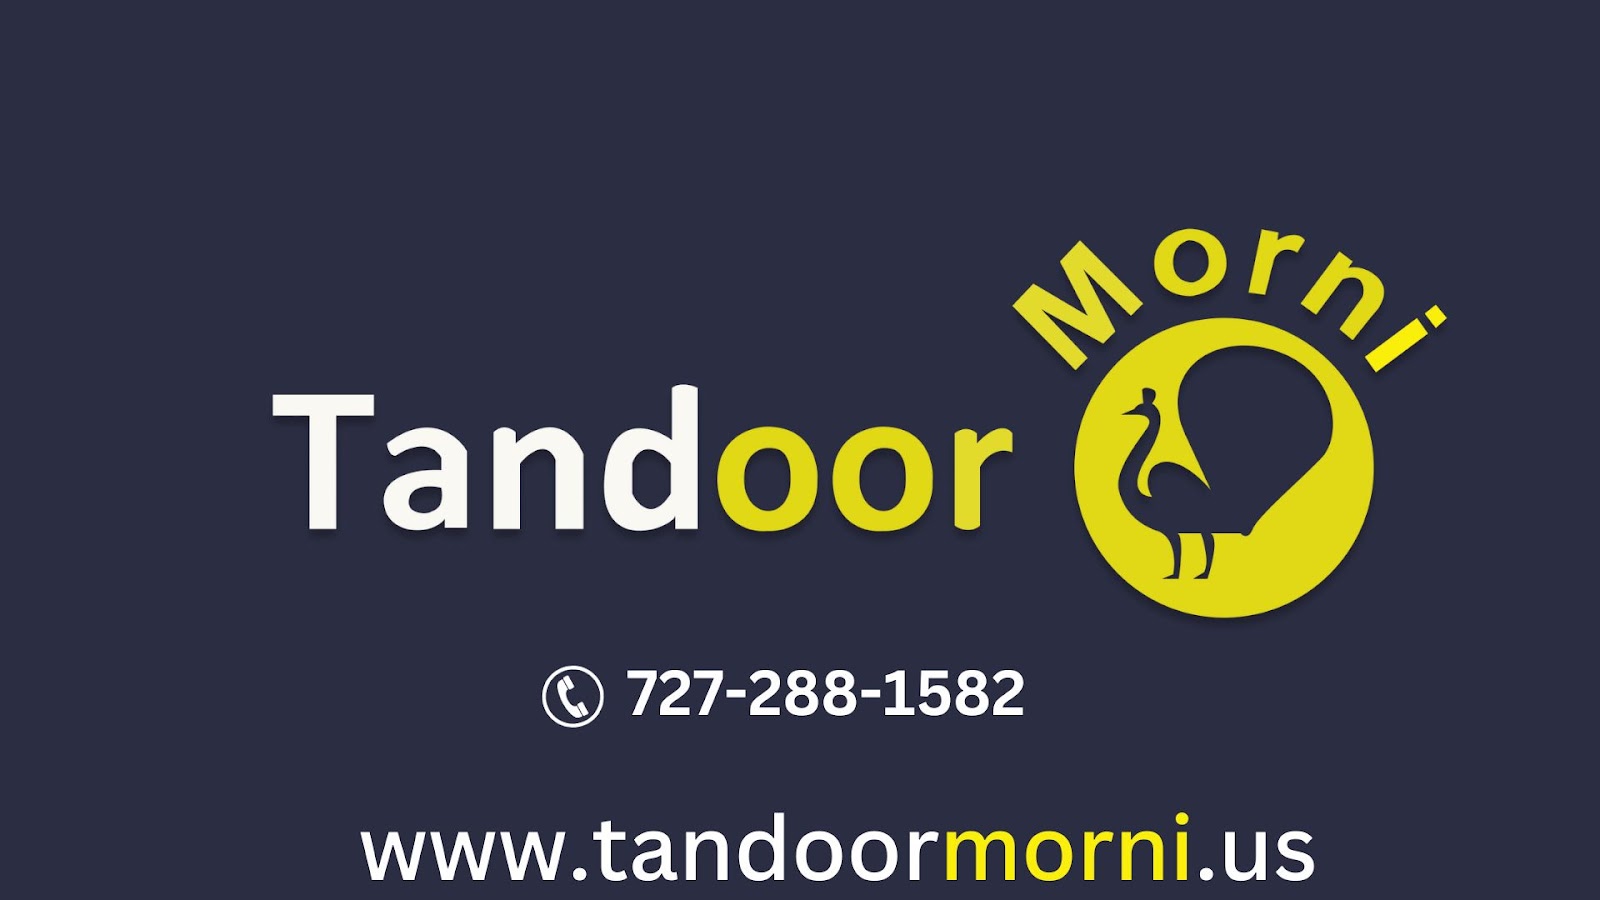 Authentic Tandoor for Sale: Enhance Your Culinary Journey!